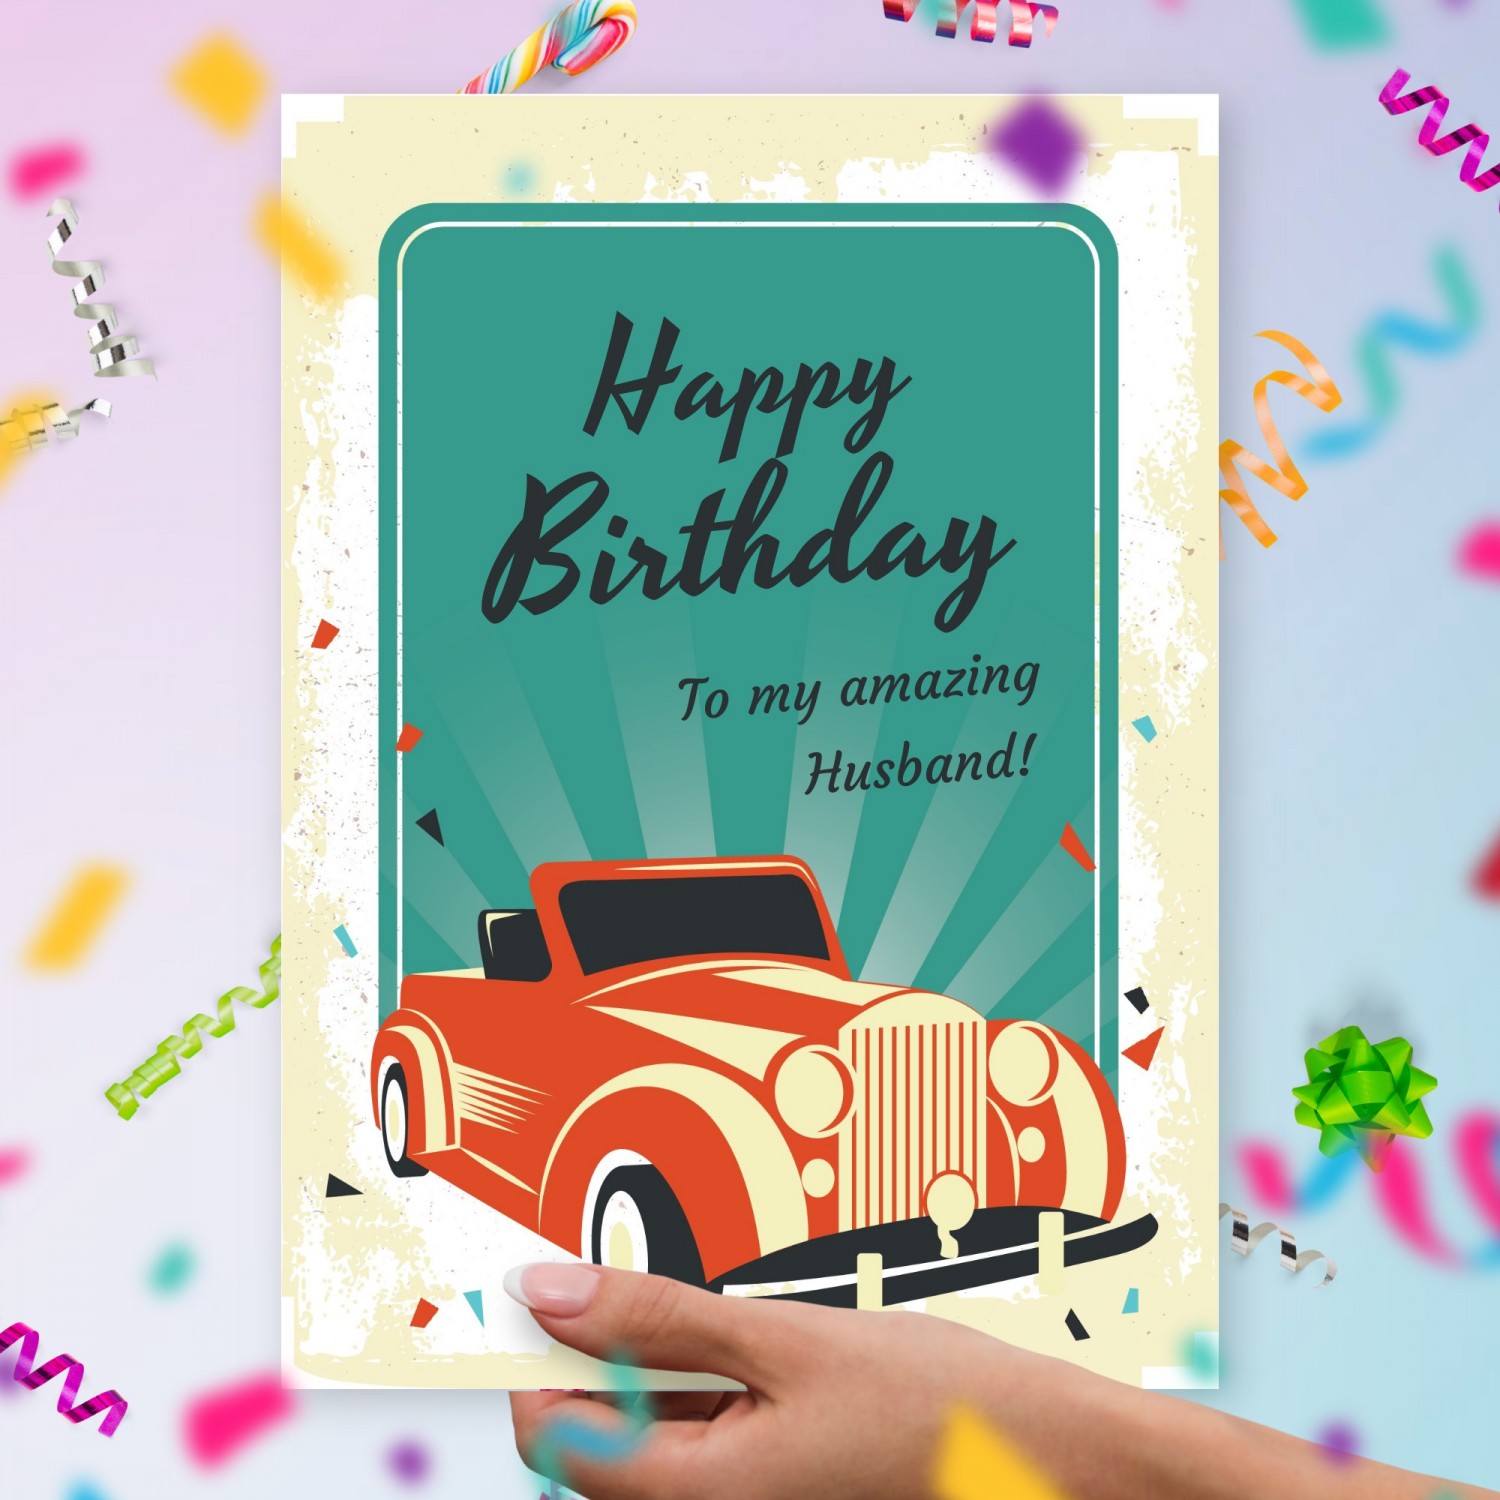 Happy Birthday Card For Husband - Retro Car Style Template Editable Online